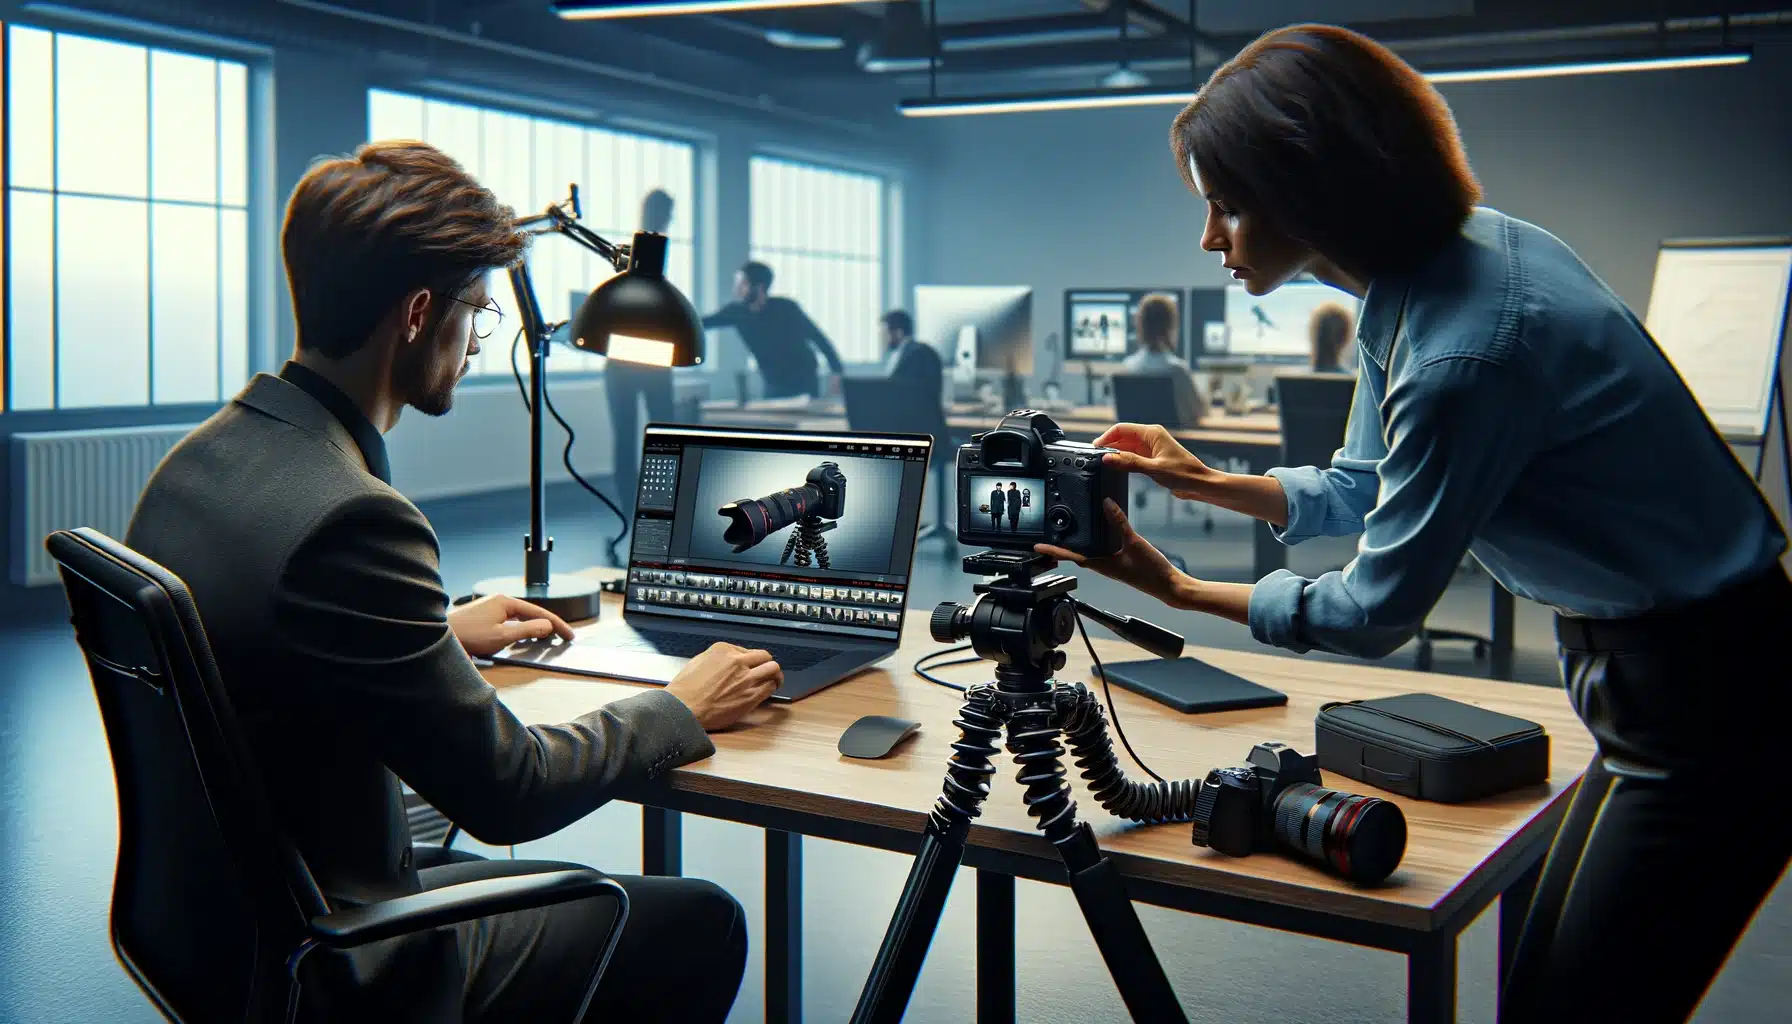 Two professionals setting up a tethered camera in an office, with one adjusting the camera and the other configuring settings on a laptop displaying the live feed.